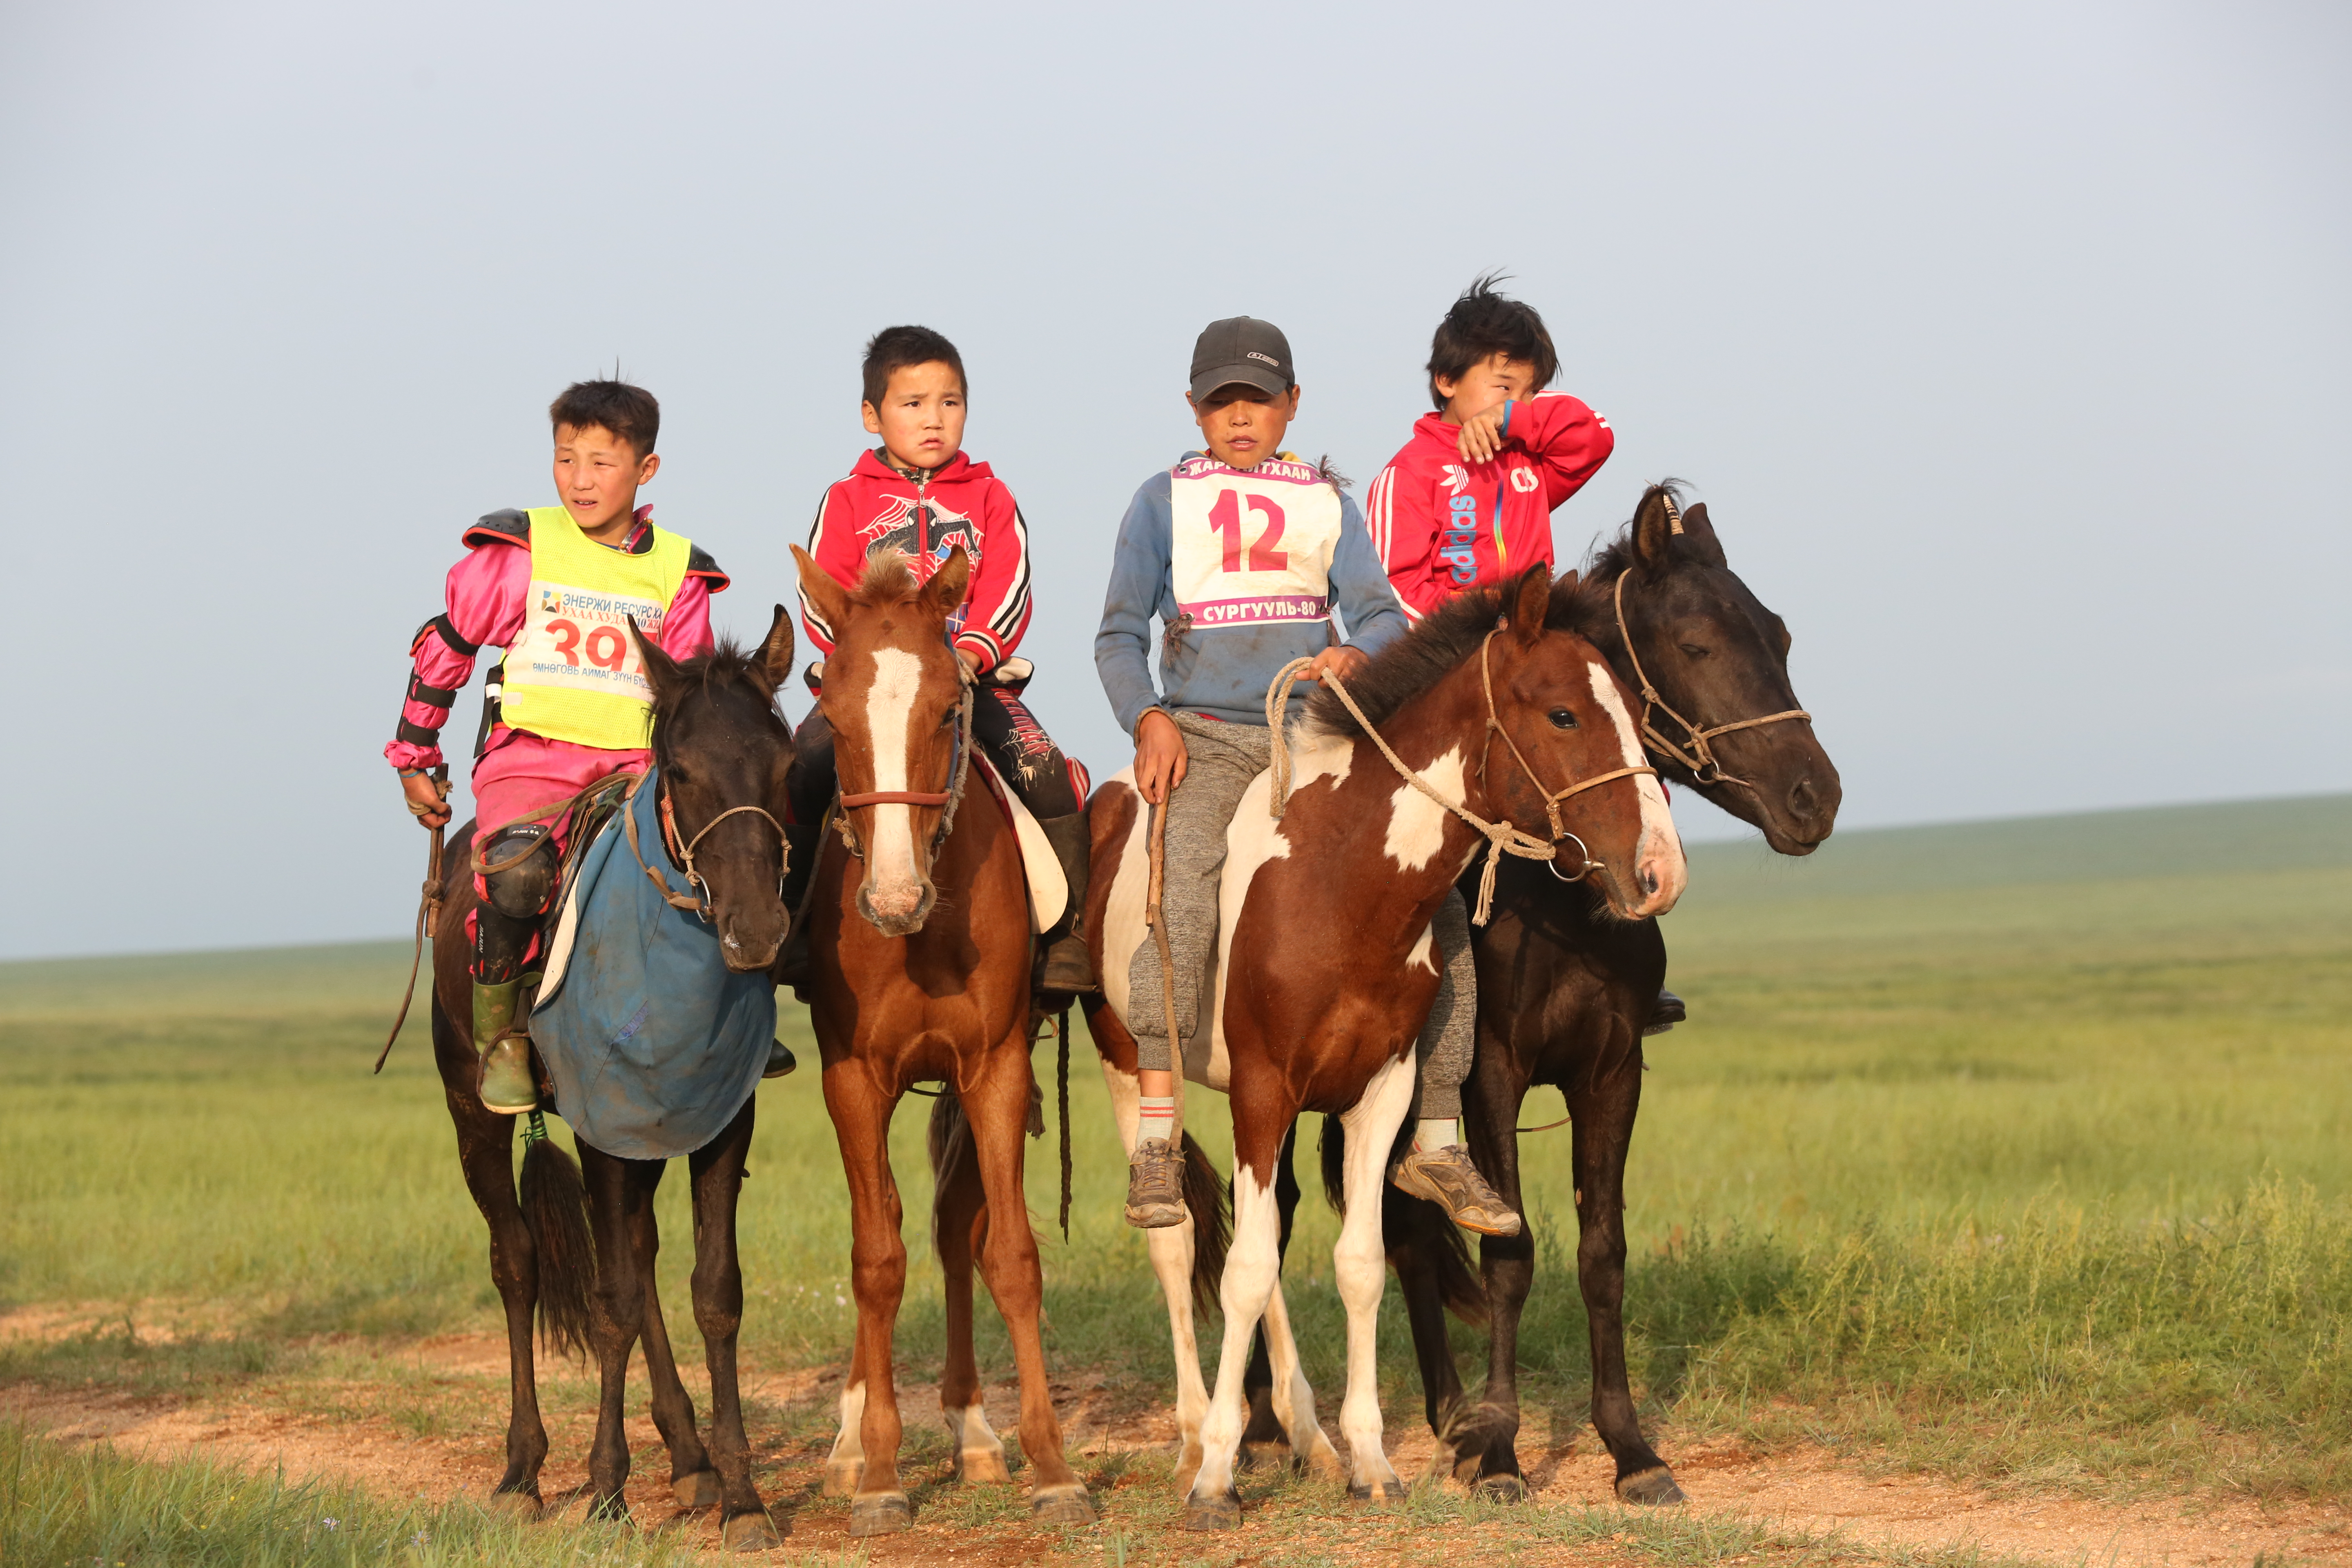  Jockeys of the Steppe Horse racing is the #1 sport in Mongolia and young boys are the jockeys. These locals show their amazing riding skills to the officials and riders!